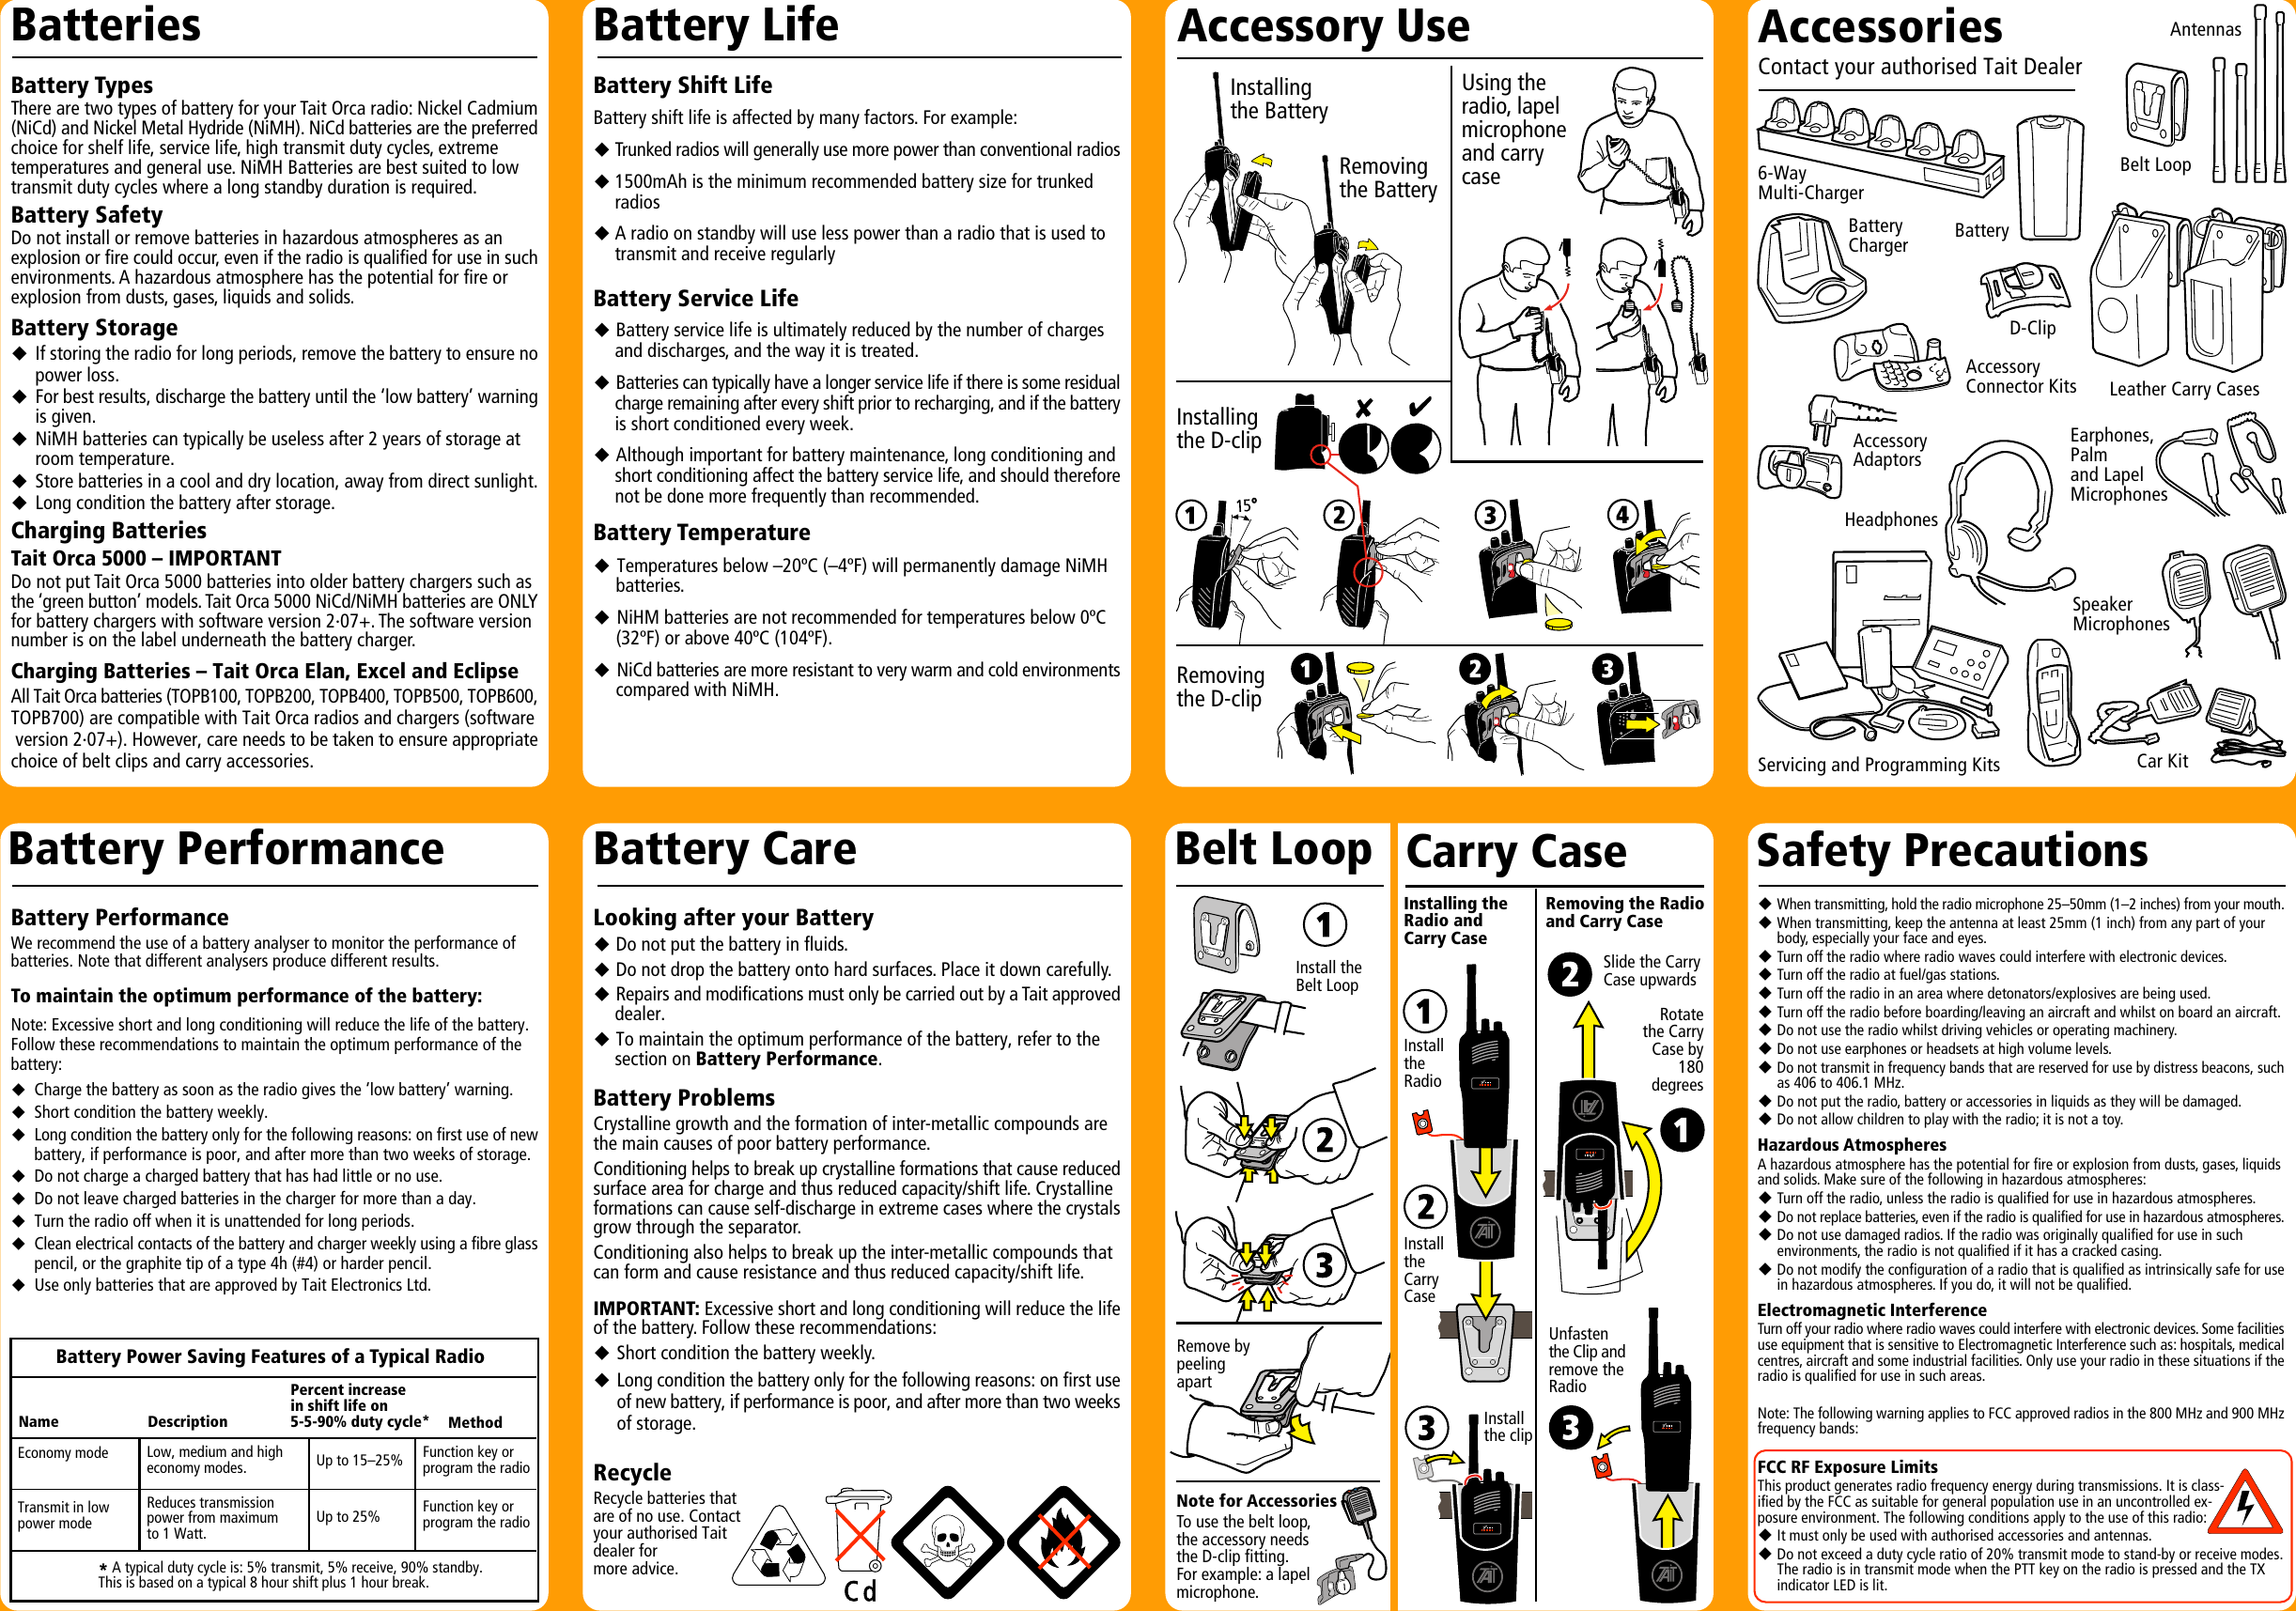 Looking after your BatteryuDo not put the battery in fluids.uDo not drop the battery onto hard surfaces. Place it down carefully.uRepairs and modifications must only be carried out by a Tait approveddealer.uTo maintain the optimum performance of the battery, refer to thesection on Battery Performance.Battery ProblemsCrystalline growth and the formation of inter-metallic compounds arethe main causes of poor battery performance.Conditioning helps to break up crystalline formations that cause reducedsurface area for charge and thus reduced capacity/shift life. Crystallineformations can cause self-discharge in extreme cases where the crystalsgrow through the separator.Conditioning also helps to break up the inter-metallic compounds thatcan form and cause resistance and thus reduced capacity/shift life.IMPORTANT: Excessive short and long conditioning will reduce the lifeof the battery. Follow these recommendations:uShort condition the battery weekly.uLong condition the battery only for the following reasons: on first useof new battery, if performance is poor, and after more than two weeksof storage.RecycleRecycle batteries thatare of no use. Contactyour authorised Taitdealer formore advice.Safety PrecautionsEarphones,Palmand LapelMicrophonesBatteryCharger6-WayMulti-ChargerBatteryAntennasAccessoryConnector KitsD-ClipLeather Carry CasesBelt LoopCar KitAccessoryAdaptorsHeadphonesServicing and Programming KitsSpeakerMicrophonesAccessoriesContact your authorised Tait DealerAccessory UseCarry CaseBelt LoopInstallingthe D-clipNote for AccessoriesTo use the belt loop,the accessory needsthe D-clip fitting.For example: a lapelmicrophone.Using theradio, lapelmicrophoneand carrycaseRemove bypeelingapartInstall theBelt LoopRemovingthe D-clipInstallingthe BatteryRemovingthe BatteryInstalling theRadio andCarry CaseRemoving the Radioand Carry CaseRotatethe CarryCase by180degreesSlide the CarryCase upwardsUnfastenthe Clip andremove theRadioInstallthe clipInstalltheRadioInstalltheCarryCaseBattery PerformanceBattery TypesThere are two types of battery for your Tait Orca radio: Nickel Cadmium(NiCd) and Nickel Metal Hydride (NiMH). NiCd batteries are the preferredchoice for shelf life, service life, high transmit duty cycles, extremetemperatures and general use. NiMH Batteries are best suited to lowtransmit duty cycles where a long standby duration is required.Battery SafetyDo not install or remove batteries in hazardous atmospheres as anexplosion or fire could occur, even if the radio is qualified for use in suchenvironments. A hazardous atmosphere has the potential for fire orexplosion from dusts, gases, liquids and solids.Battery StorageuIf storing the radio for long periods, remove the battery to ensure nopower loss.uFor best results, discharge the battery until the ‘low battery’ warningis given.uNiMH batteries can typically be useless after 2 years of storage at room temperature.uStore batteries in a cool and dry location, away from direct sunlight.uLong condition the battery after storage.Charging BatteriesTait Orca 5000 – IMPORTANTDo not put Tait Orca 5000 batteries into older battery chargers such asthe ‘green button’ models. Tait Orca 5000 NiCd/NiMH batteries are ONLYfor battery chargers with software version 2·07+. The software versionnumber is on the label underneath the battery charger.Charging Batteries – Tait Orca Elan, Excel and EclipseAll Tait Orca batteries (TOPB100, TOPB200, TOPB400, TOPB500, TOPB600,TOPB700) are compatible with Tait Orca radios and chargers (software version 2·07+). However, care needs to be taken to ensure appropriatechoice of belt clips and carry accessories.Battery Shift LifeBattery shift life is affected by many factors. For example:uTrunked radios will generally use more power than conventional radiosu1500mAh is the minimum recommended battery size for trunkedradiosuA radio on standby will use less power than a radio that is used totransmit and receive regularlyBattery Service LifeuBattery service life is ultimately reduced by the number of chargesand discharges, and the way it is treated.uBatteries can typically have a longer service life if there is some residualcharge remaining after every shift prior to recharging, and if the batteryis short conditioned every week.uAlthough important for battery maintenance, long conditioning andshort conditioning affect the battery service life, and should thereforenot be done more frequently than recommended.Battery TemperatureuTemperatures below –20ºC (–4ºF) will permanently damage NiMHbatteries.uNiHM batteries are not recommended for temperatures below 0ºC(32ºF) or above 40ºC (104ºF).uNiCd batteries are more resistant to very warm and cold environmentscompared with NiMH.Battery PerformanceWe recommend the use of a battery analyser to monitor the performance ofbatteries. Note that different analysers produce different results.To maintain the optimum performance of the battery:Note: Excessive short and long conditioning will reduce the life of the battery.Follow these recommendations to maintain the optimum performance of thebattery:uCharge the battery as soon as the radio gives the ‘low battery’ warning.uShort condition the battery weekly.uLong condition the battery only for the following reasons: on first use of newbattery, if performance is poor, and after more than two weeks of storage.uDo not charge a charged battery that has had little or no use.uDo not leave charged batteries in the charger for more than a day.uTurn the radio off when it is unattended for long periods.uClean electrical contacts of the battery and charger weekly using a fibre glasspencil, or the graphite tip of a type 4h (#4) or harder pencil.uUse only batteries that are approved by Tait Electronics Ltd.Battery Power Saving Features of a Typical Radio* A typical duty cycle is: 5% transmit, 5% receive, 90% standby.This is based on a typical 8 hour shift plus 1 hour break.Reduces transmissionpower from maximumto 1 Watt.Low, medium and higheconomy modes.Battery LifeBatteriesBattery CareEconomy mode Up to 15–25%Percent increasein shift life on5-5-90% duty cycle* MethodDescriptionNameFunction key orprogram the radioFunction key orprogram the radioTransmit in lowpower mode Up to 25%uWhen transmitting, hold the radio microphone 25–50mm (1–2 inches) from your mouth.uWhen transmitting, keep the antenna at least 25mm (1 inch) from any part of yourbody, especially your face and eyes.uTurn off the radio where radio waves could interfere with electronic devices.uTurn off the radio at fuel/gas stations.uTurn off the radio in an area where detonators/explosives are being used.uTurn off the radio before boarding/leaving an aircraft and whilst on board an aircraft.uDo not use the radio whilst driving vehicles or operating machinery.uDo not use earphones or headsets at high volume levels.uDo not transmit in frequency bands that are reserved for use by distress beacons, suchas 406 to 406.1 MHz.uDo not put the radio, battery or accessories in liquids as they will be damaged.uDo not allow children to play with the radio; it is not a toy.Hazardous AtmospheresA hazardous atmosphere has the potential for fire or explosion from dusts, gases, liquidsand solids. Make sure of the following in hazardous atmospheres:uTurn off the radio, unless the radio is qualified for use in hazardous atmospheres.uDo not replace batteries, even if the radio is qualified for use in hazardous atmospheres.uDo not use damaged radios. If the radio was originally qualified for use in such environments, the radio is not qualified if it has a cracked casing.uDo not modify the configuration of a radio that is qualified as intrinsically safe for usein hazardous atmospheres. If you do, it will not be qualified.Electromagnetic InterferenceTurn off your radio where radio waves could interfere with electronic devices. Some facilitiesuse equipment that is sensitive to Electromagnetic Interference such as: hospitals, medicalcentres, aircraft and some industrial facilities. Only use your radio in these situations if theradio is qualified for use in such areas.Note: The following warning applies to FCC approved radios in the 800 MHz and 900 MHzfrequency bands:FCC RF Exposure LimitsThis product generates radio frequency energy during transmissions. It is class-ified by the FCC as suitable for general population use in an uncontrolled ex-posure environment. The following conditions apply to the use of this radio:uIt must only be used with authorised accessories and antennas.uDo not exceed a duty cycle ratio of 20% transmit mode to stand-by or receive modes.The radio is in transmit mode when the PTT key on the radio is pressed and the TX  indicator LED is lit.